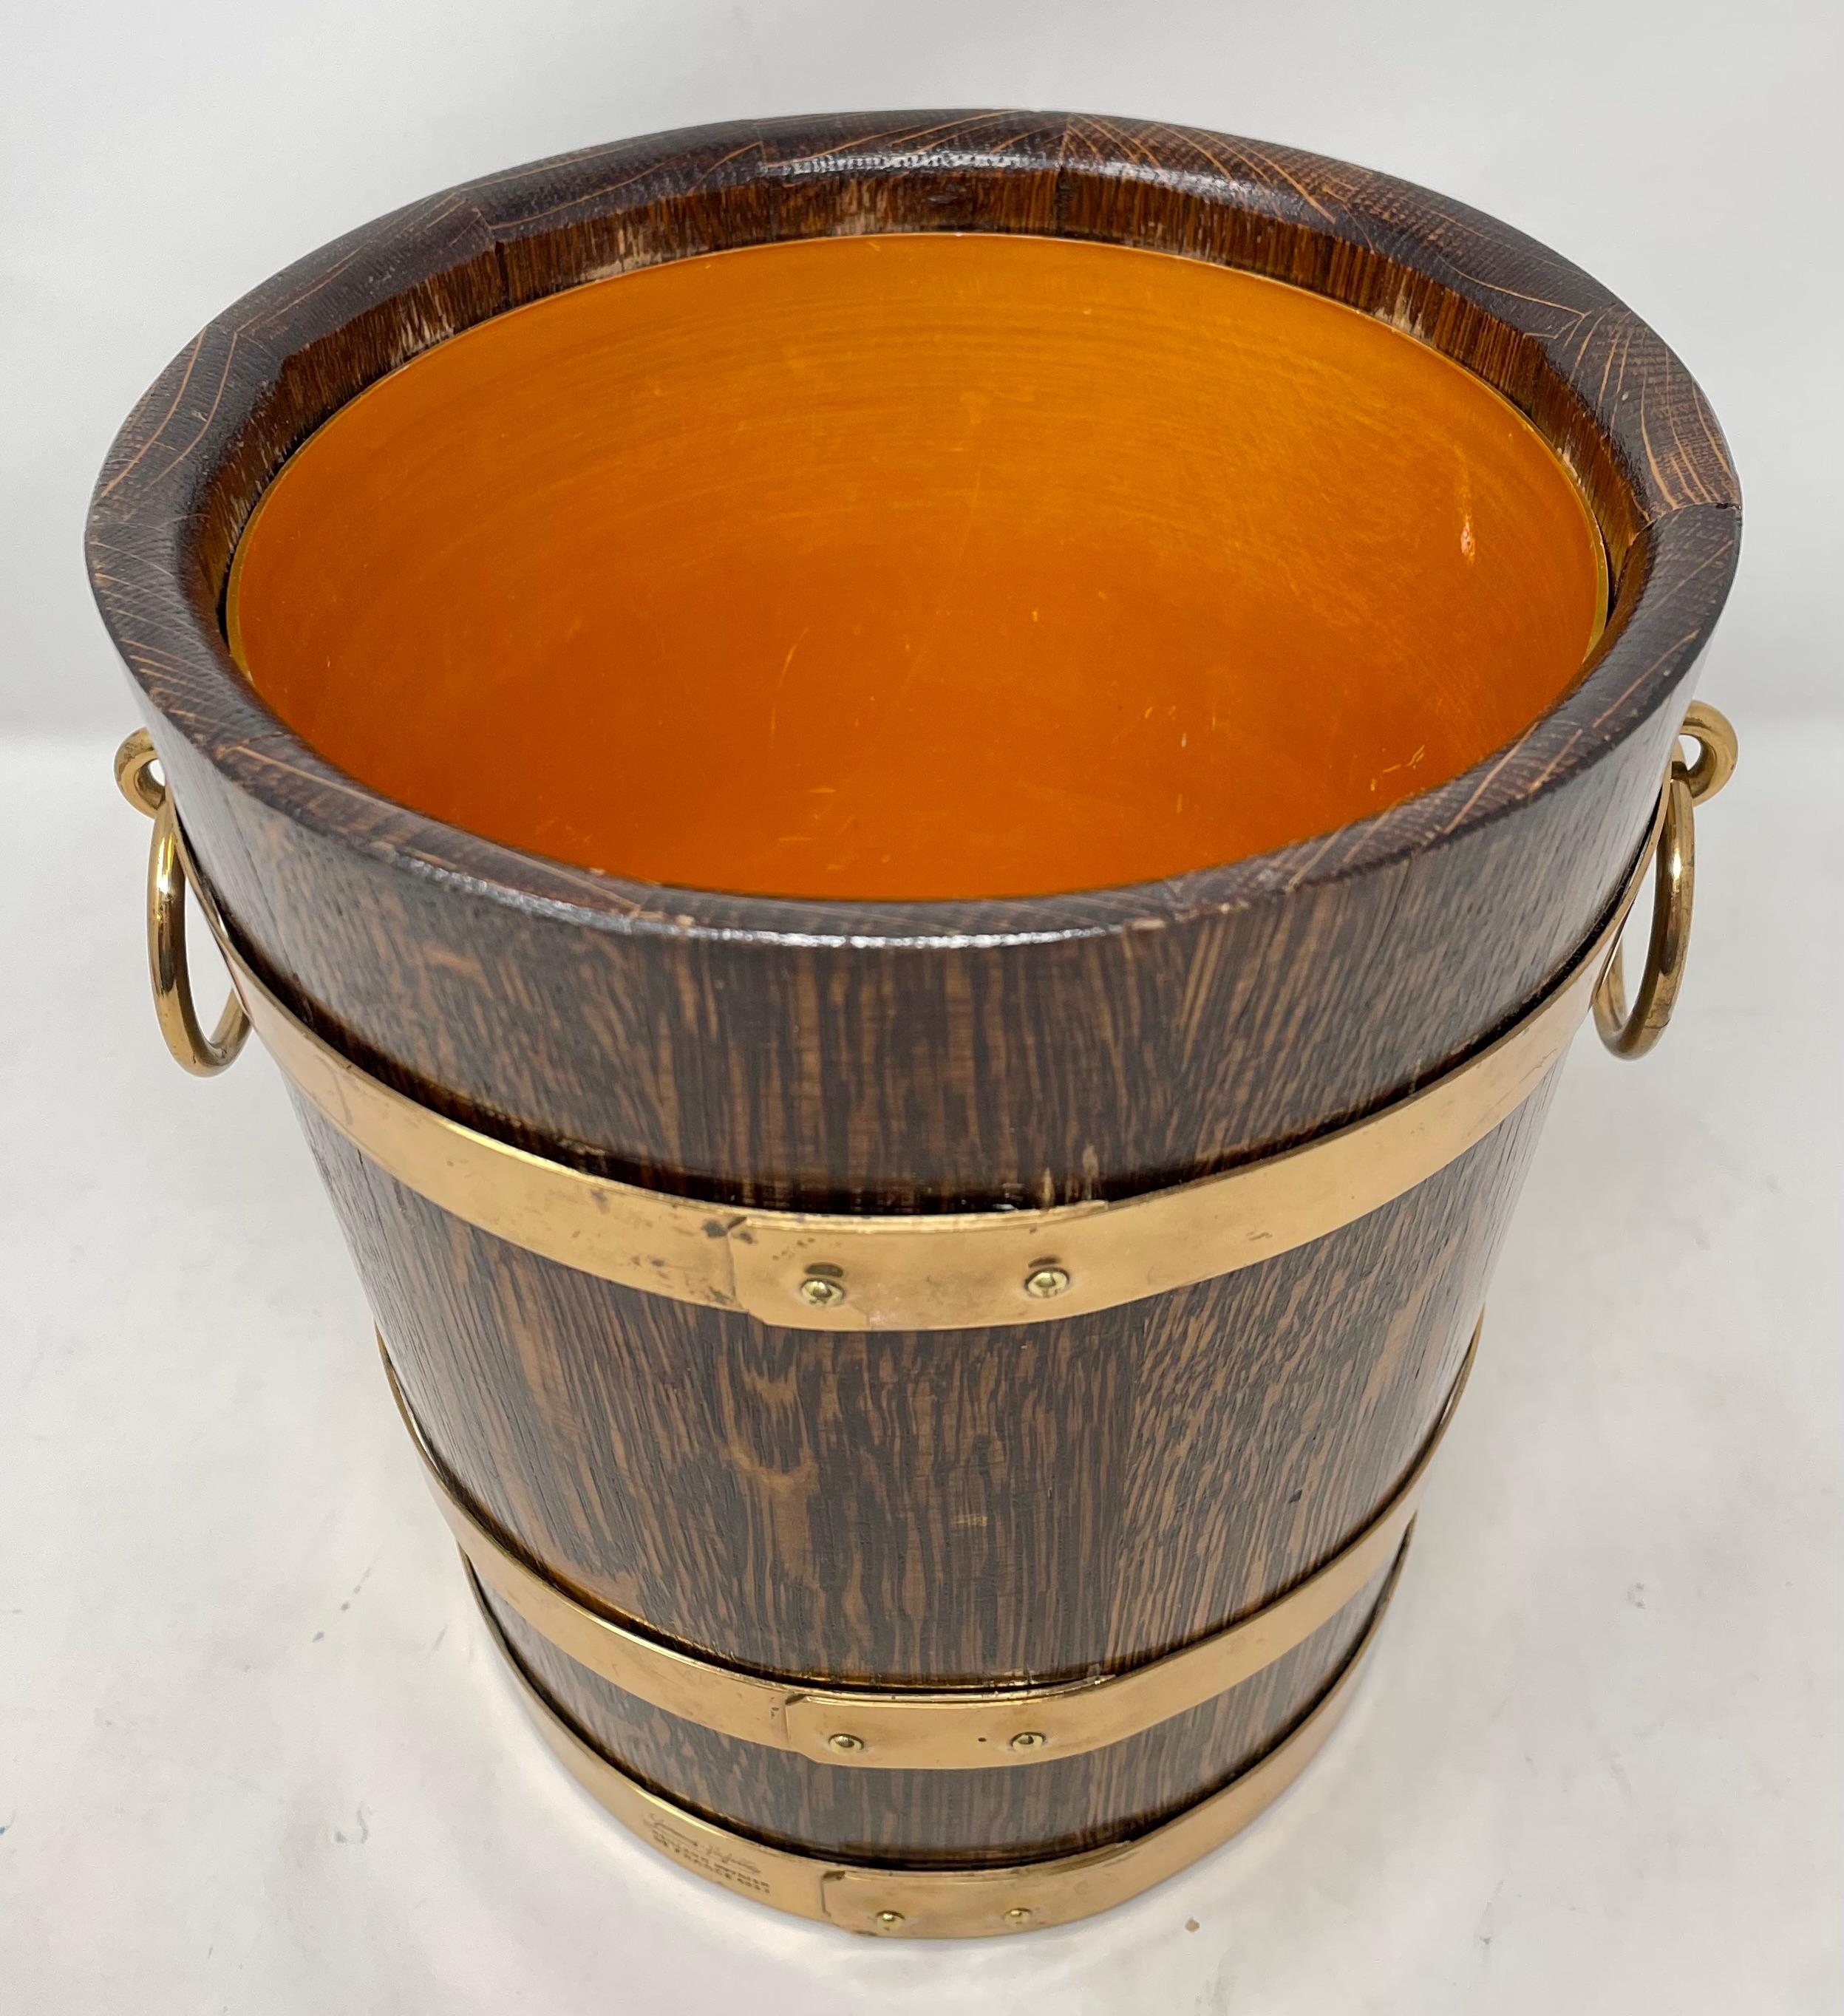 20th Century Antique French Oak & Brass Champagne Bucket with Original Liner Signed by Maker.